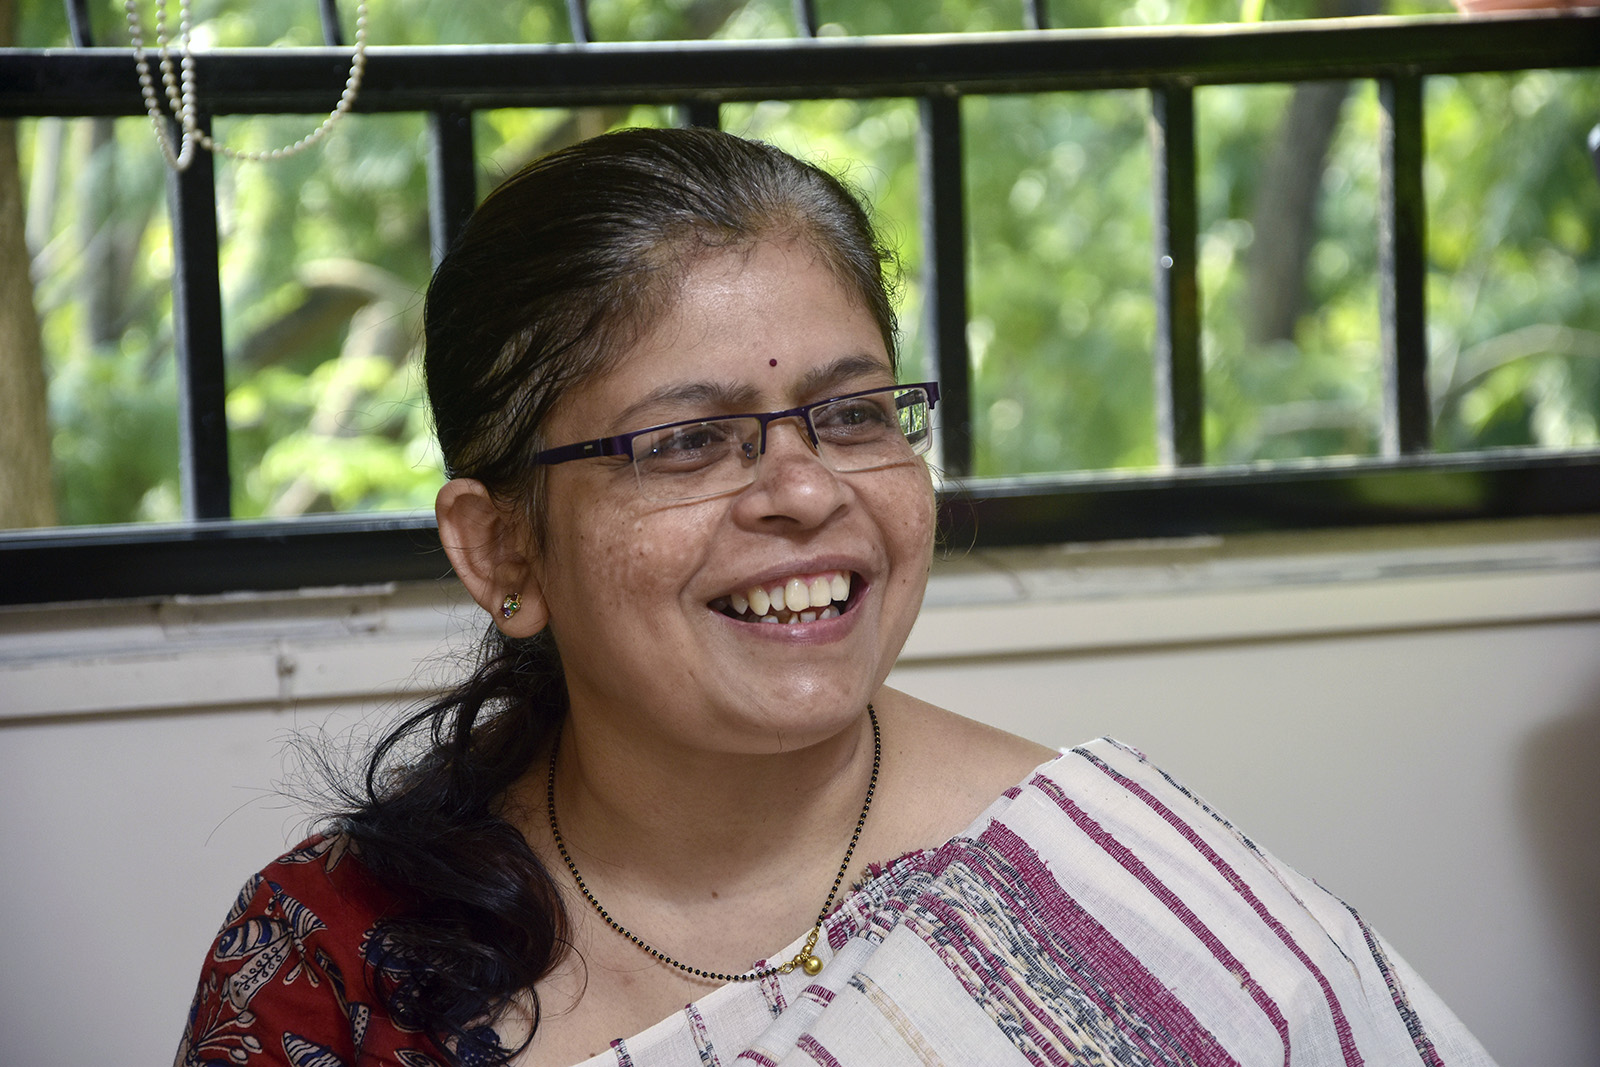 Manisha Shete, a practicing Hindu priest, smiles as she performs posthumous rituals for her client's mother at a residence in Pune, India, Wednesday, Oct. 20, 2021. Shete, who first began to officiate at religious ceremonies in 2008, said demand is growing and “people have started accepting women priests.” (AP Photo/Abhijit Bhatlekar)